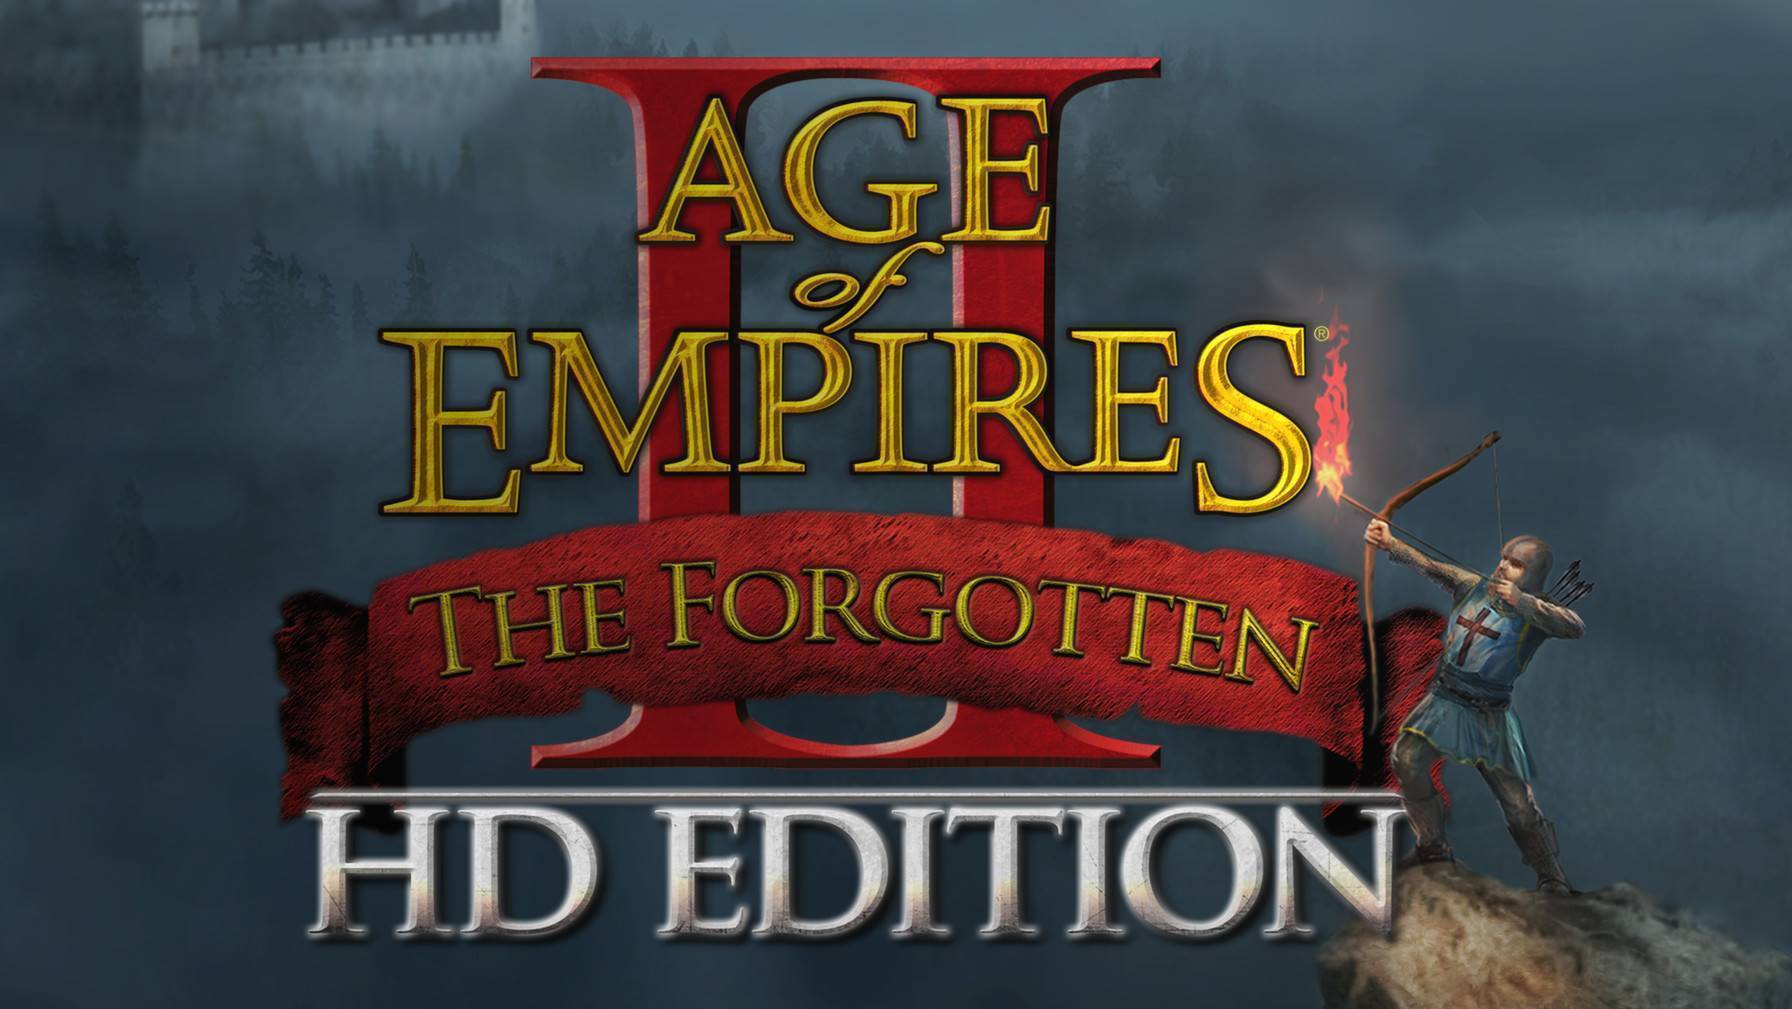 age of empires 2 free download full version brothersoft